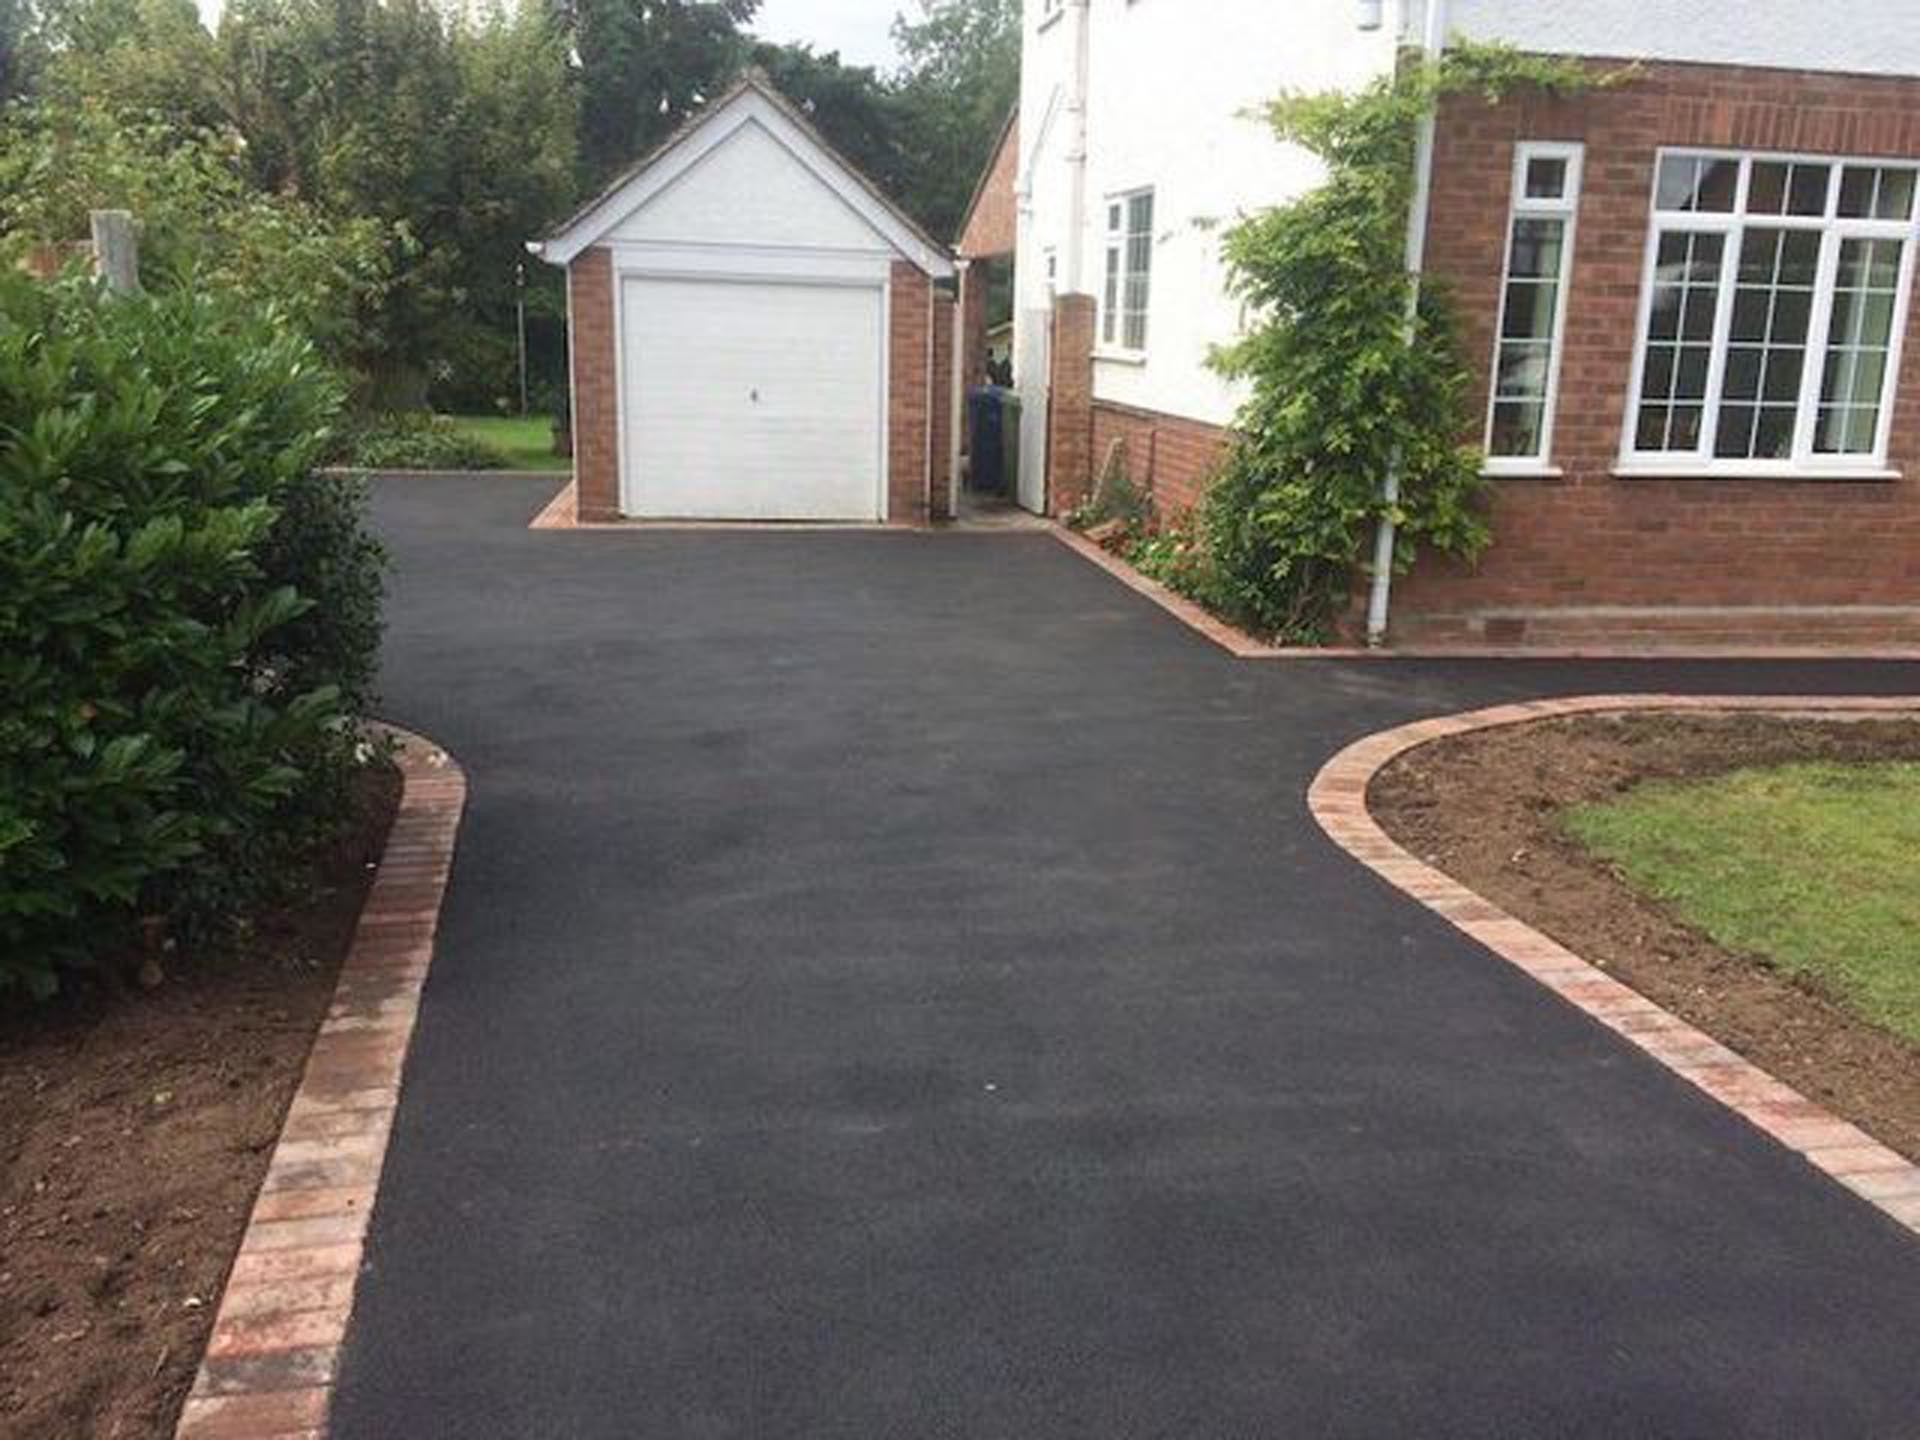 Cambs Paving - Tarmac specialists in Peterborough